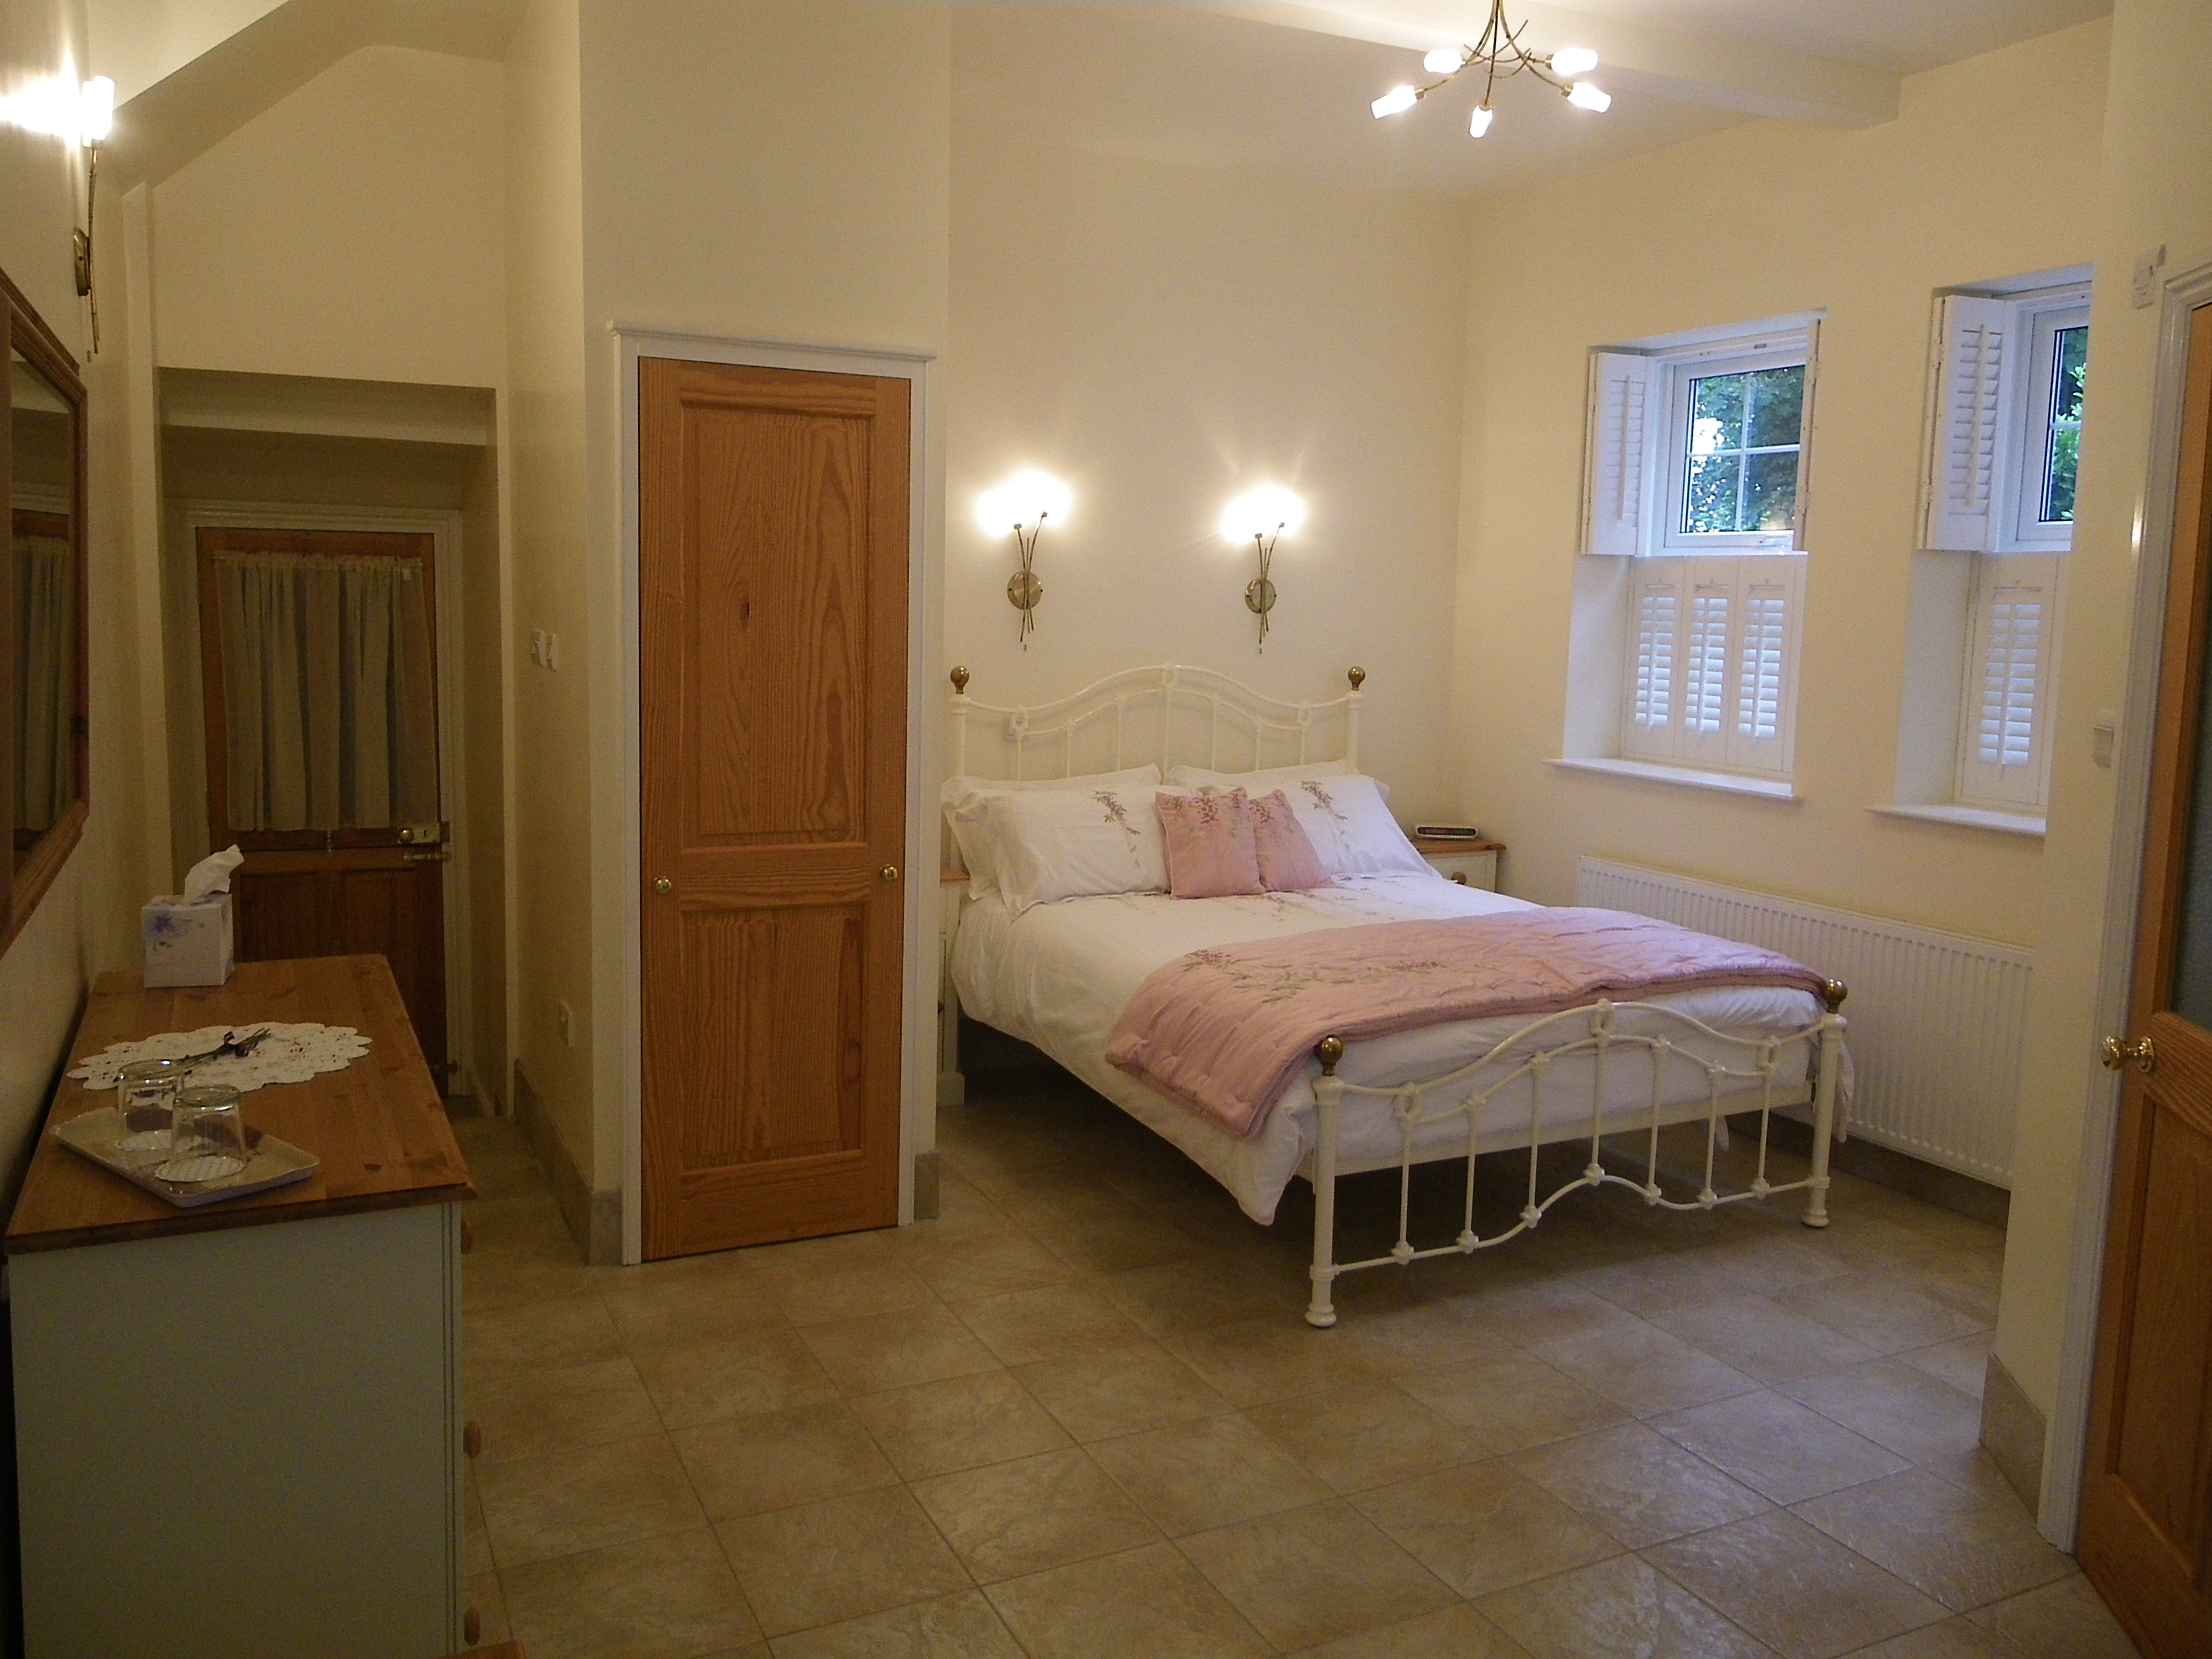 Strathmore, bed and breakast, St Margaret's Bay, near Dover, double room, guest accommodation